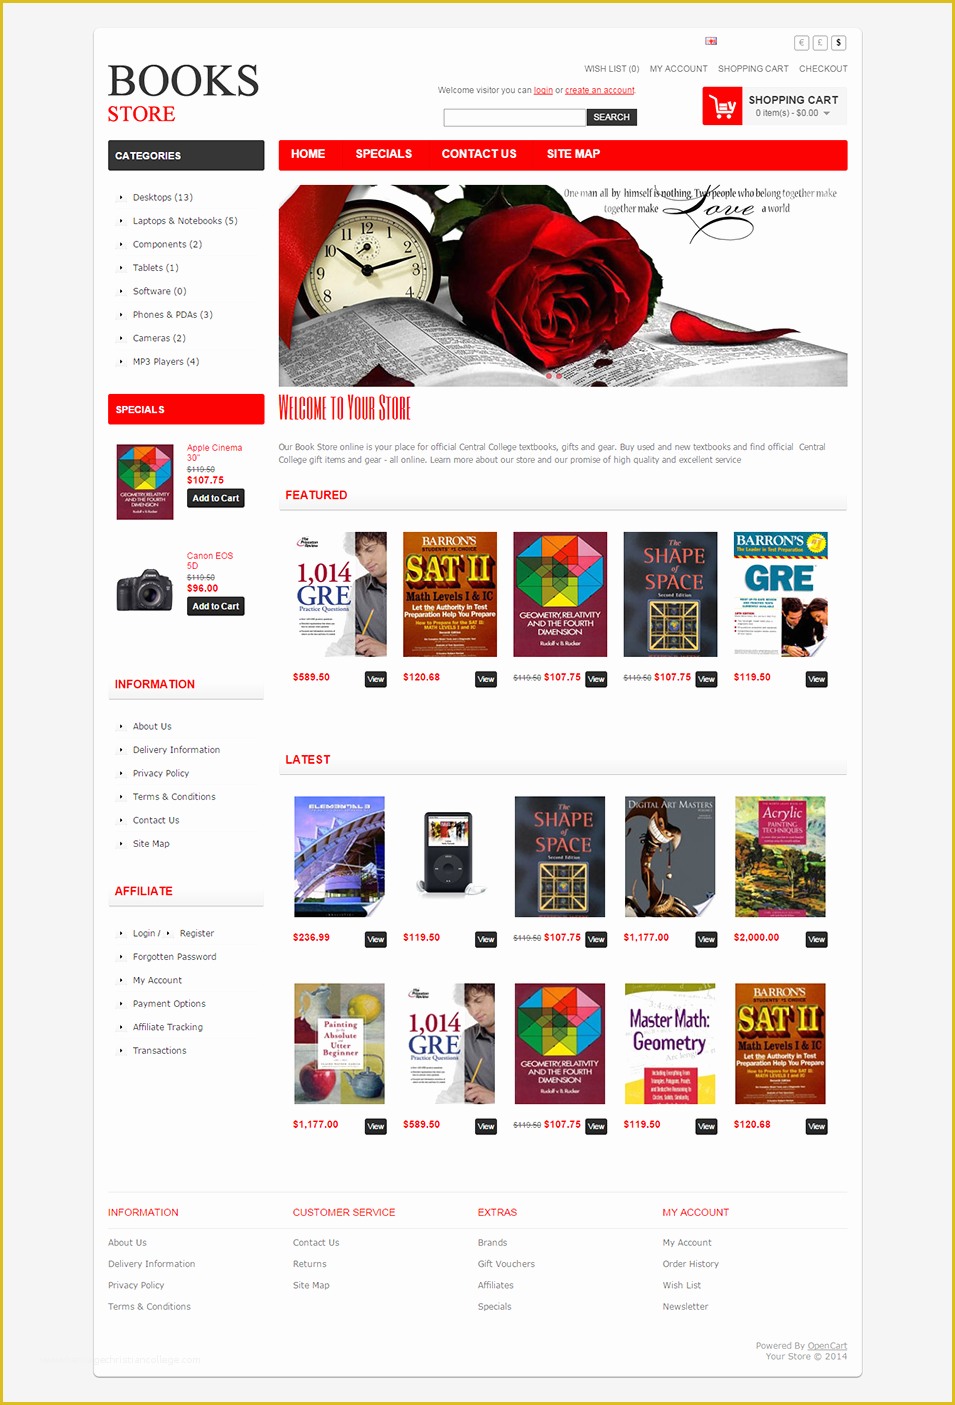 Free Website Templates for Book Publishing Of Bookstore Open Cart Website Templates & themes